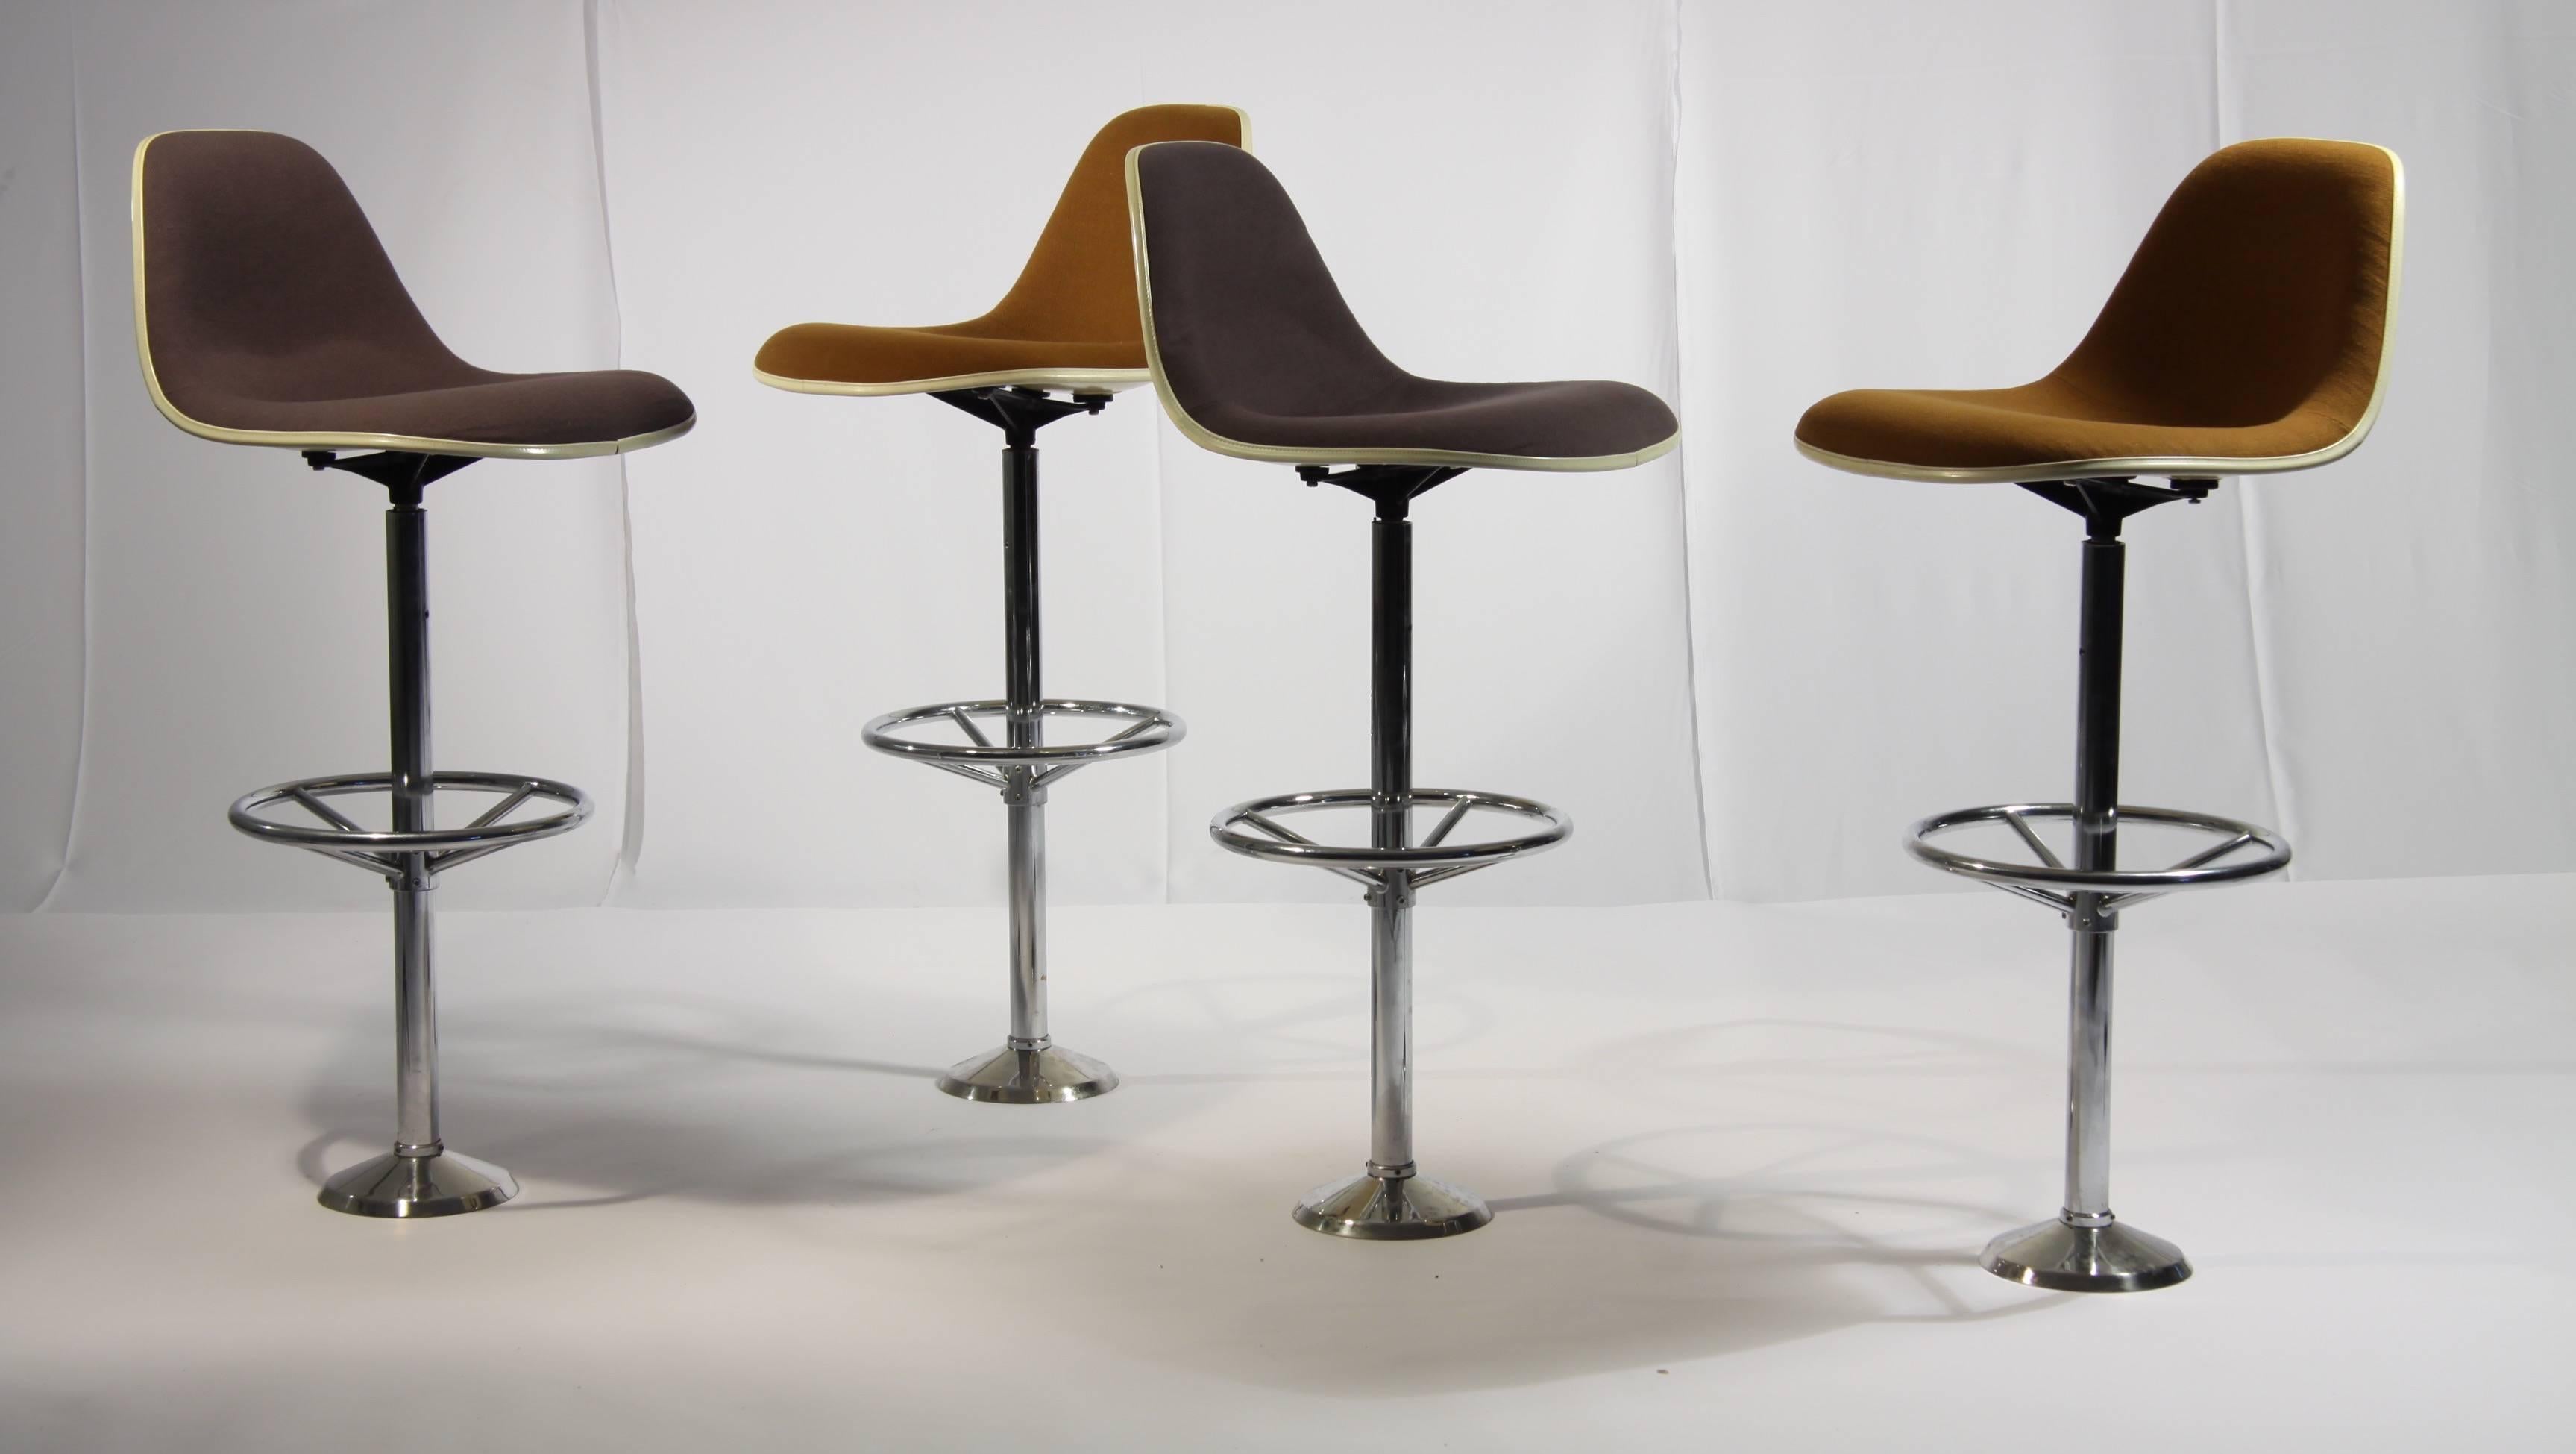 These bar stools made from brown Hopsack on a polyester shell standing on a bolted chromed column were designed by Ray & Charles Eames.